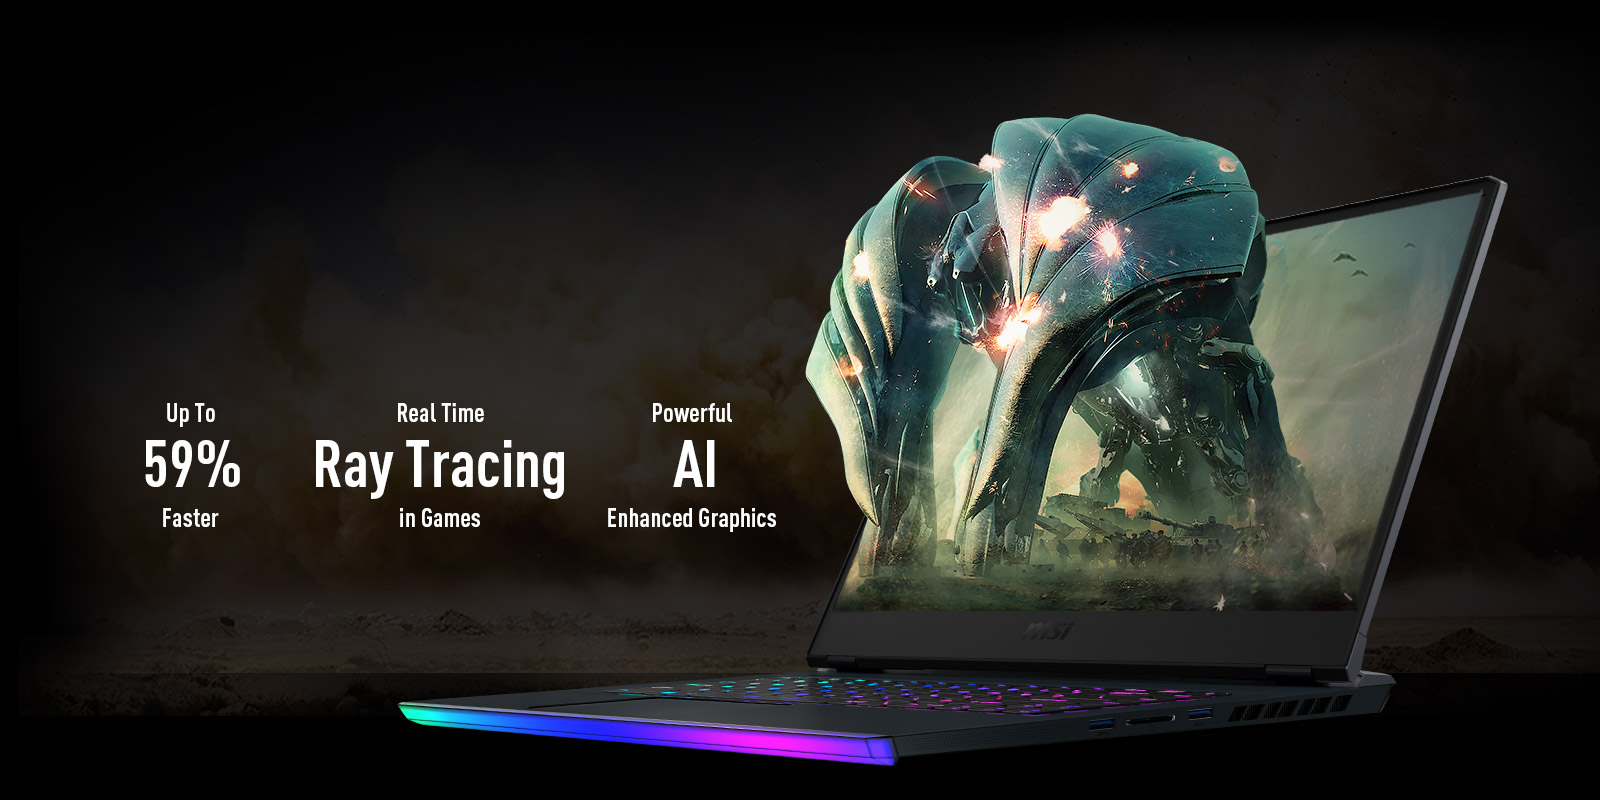 MSI GE66 Raider Gaming Laptop with RTX Graphics - UP to 59% faster, Real Time Ray Tracing in Games, Powerful AI Enhanced Graphics